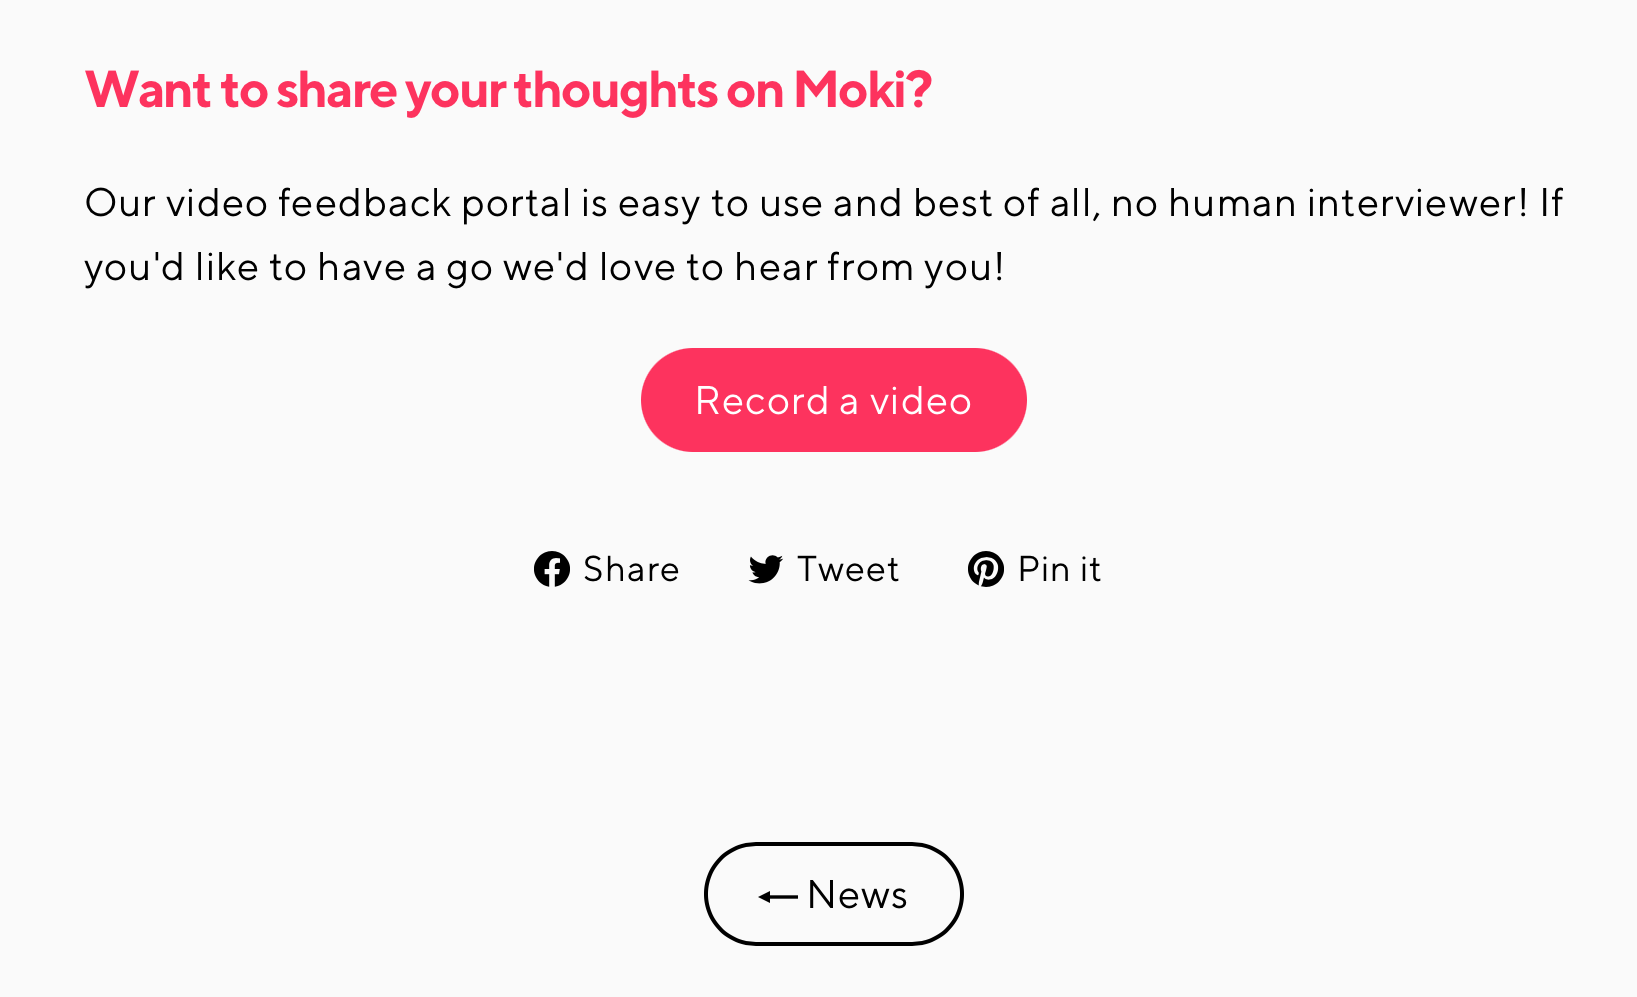 "Want to share your thoughts on Moki? Our video feedback portal is easy to use and best of all, no human interviewer!"